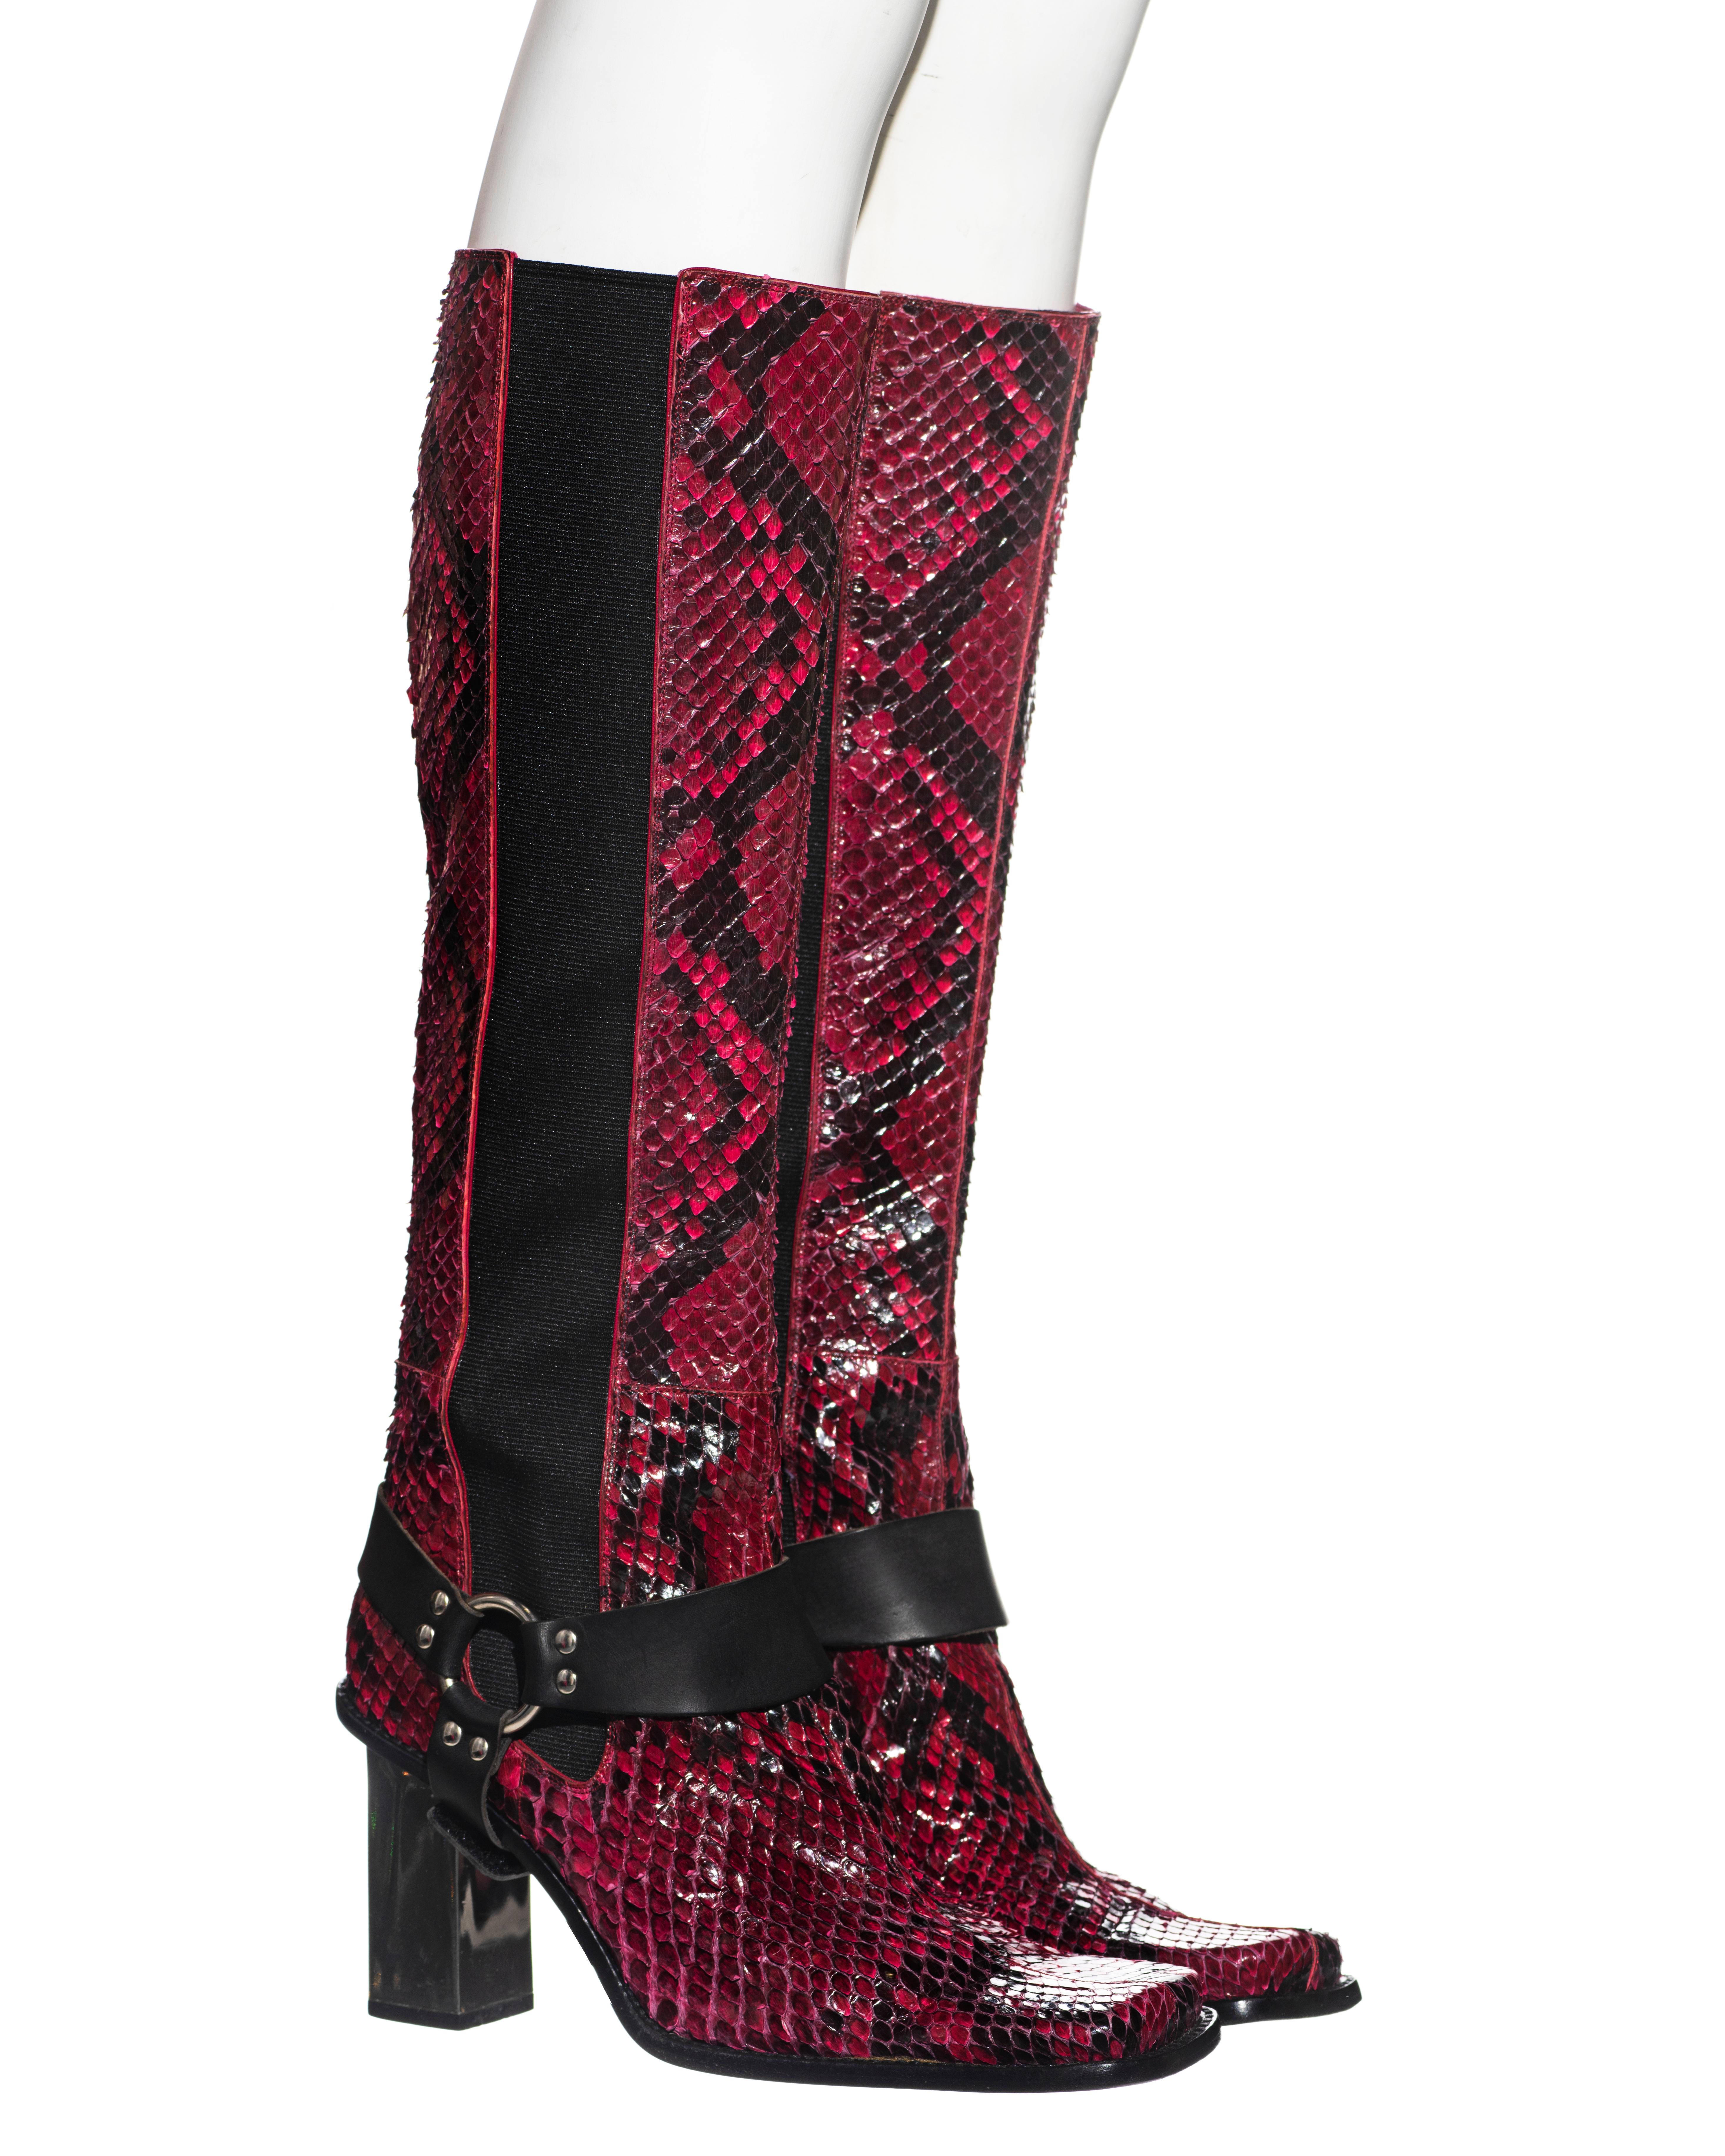 Women's Dolce & Gabbana raspberry python boots with mirrored heels, fw 1999 For Sale